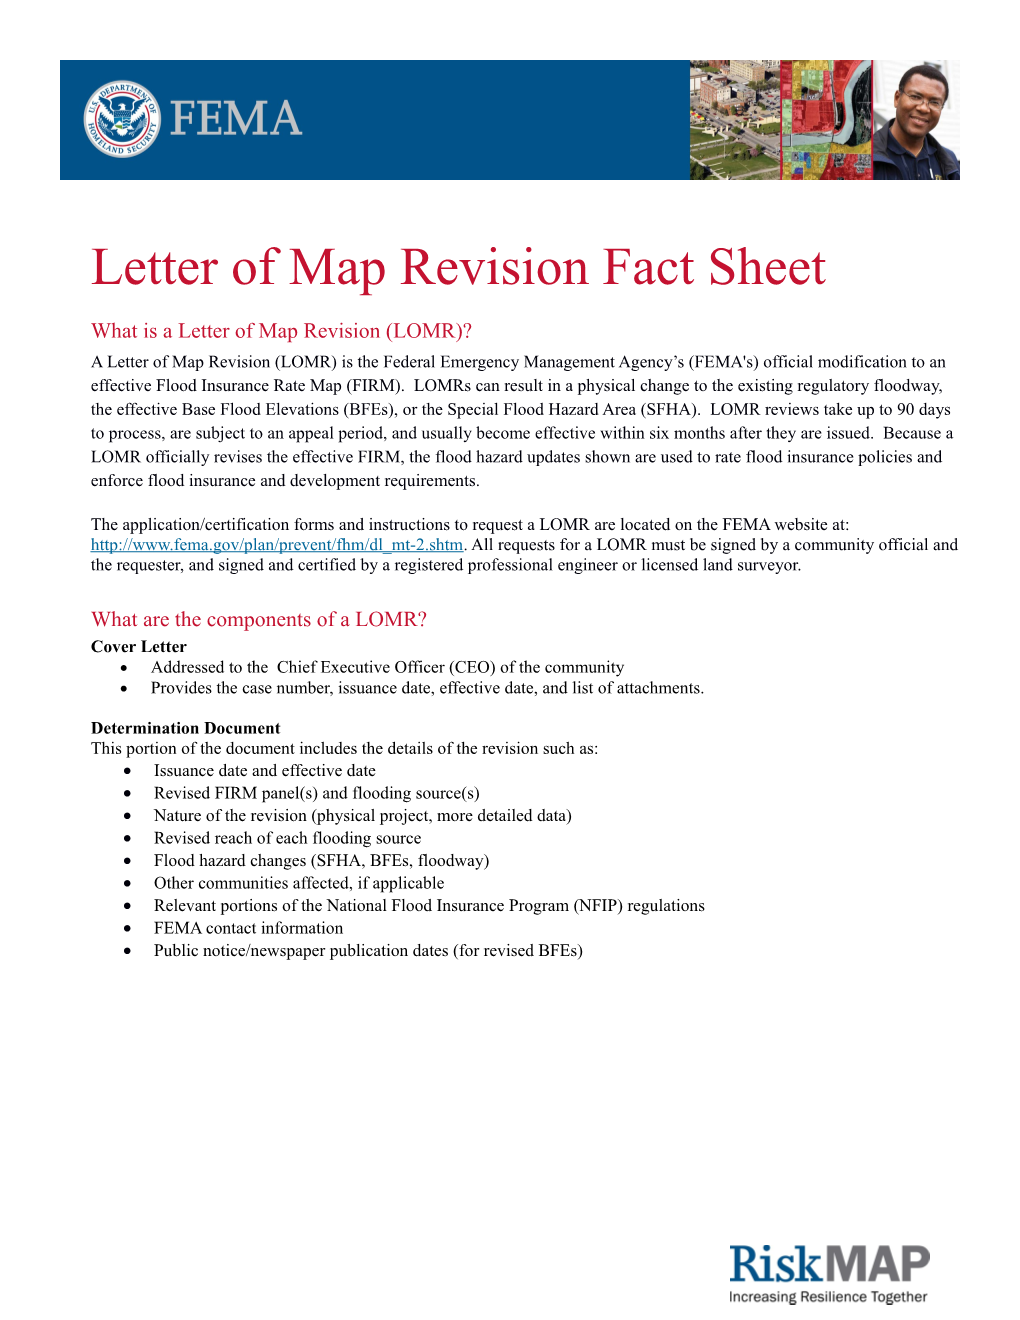 What Is a Letter of Map Revision (LOMR)?